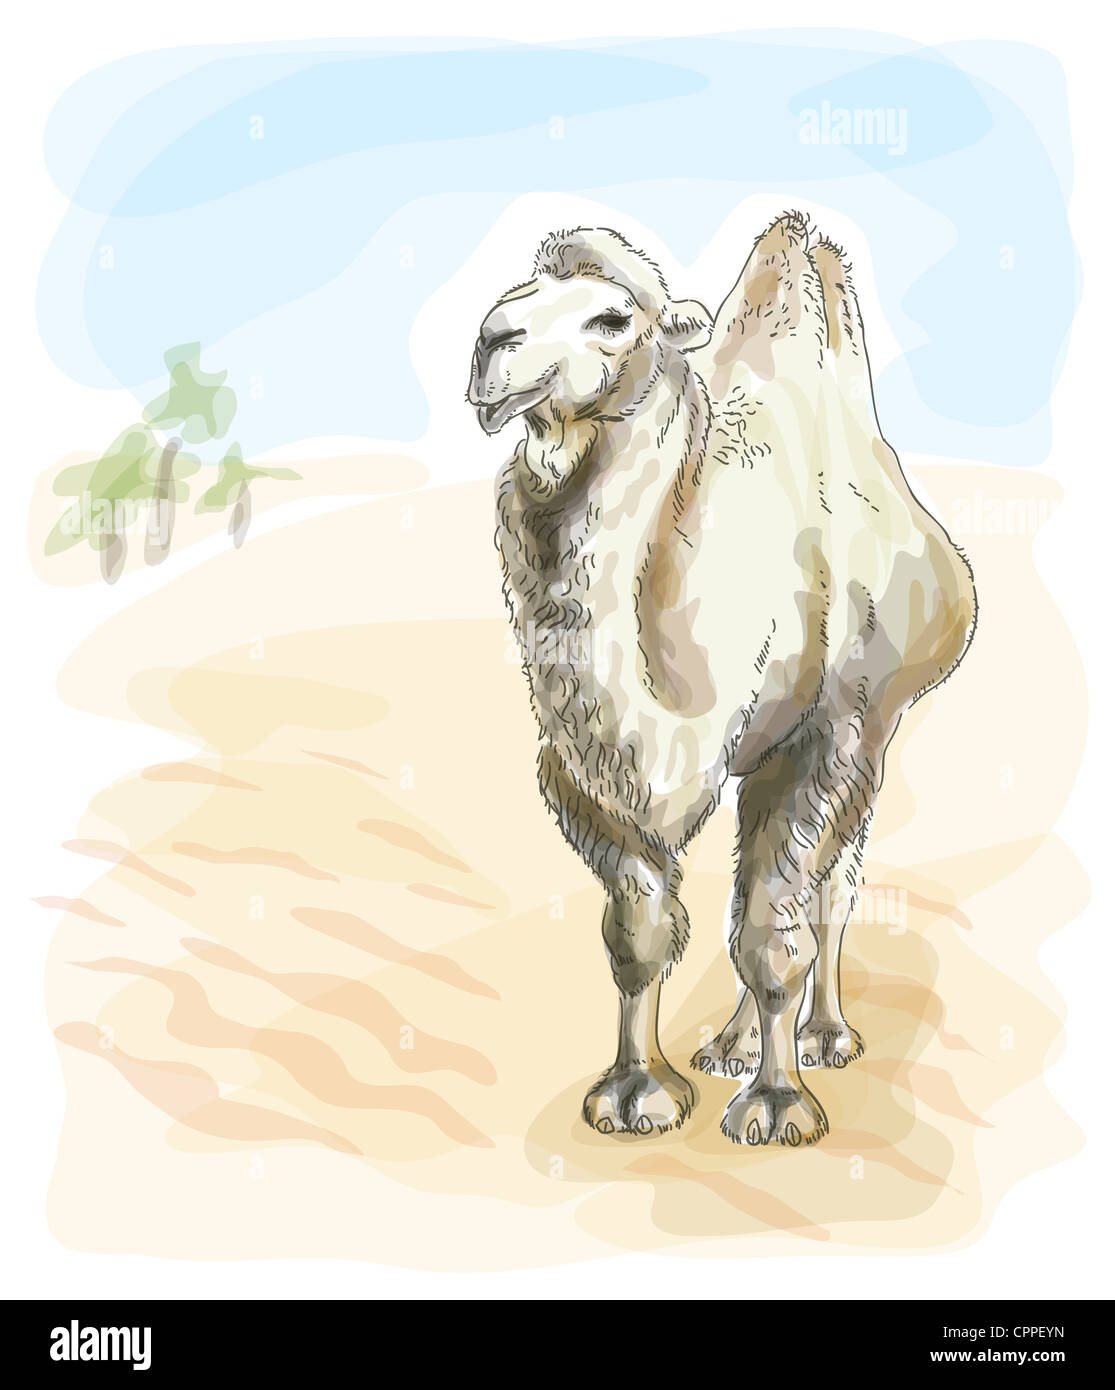 Camel Bactrian. Watercolor style. Illustration. Stock Photo